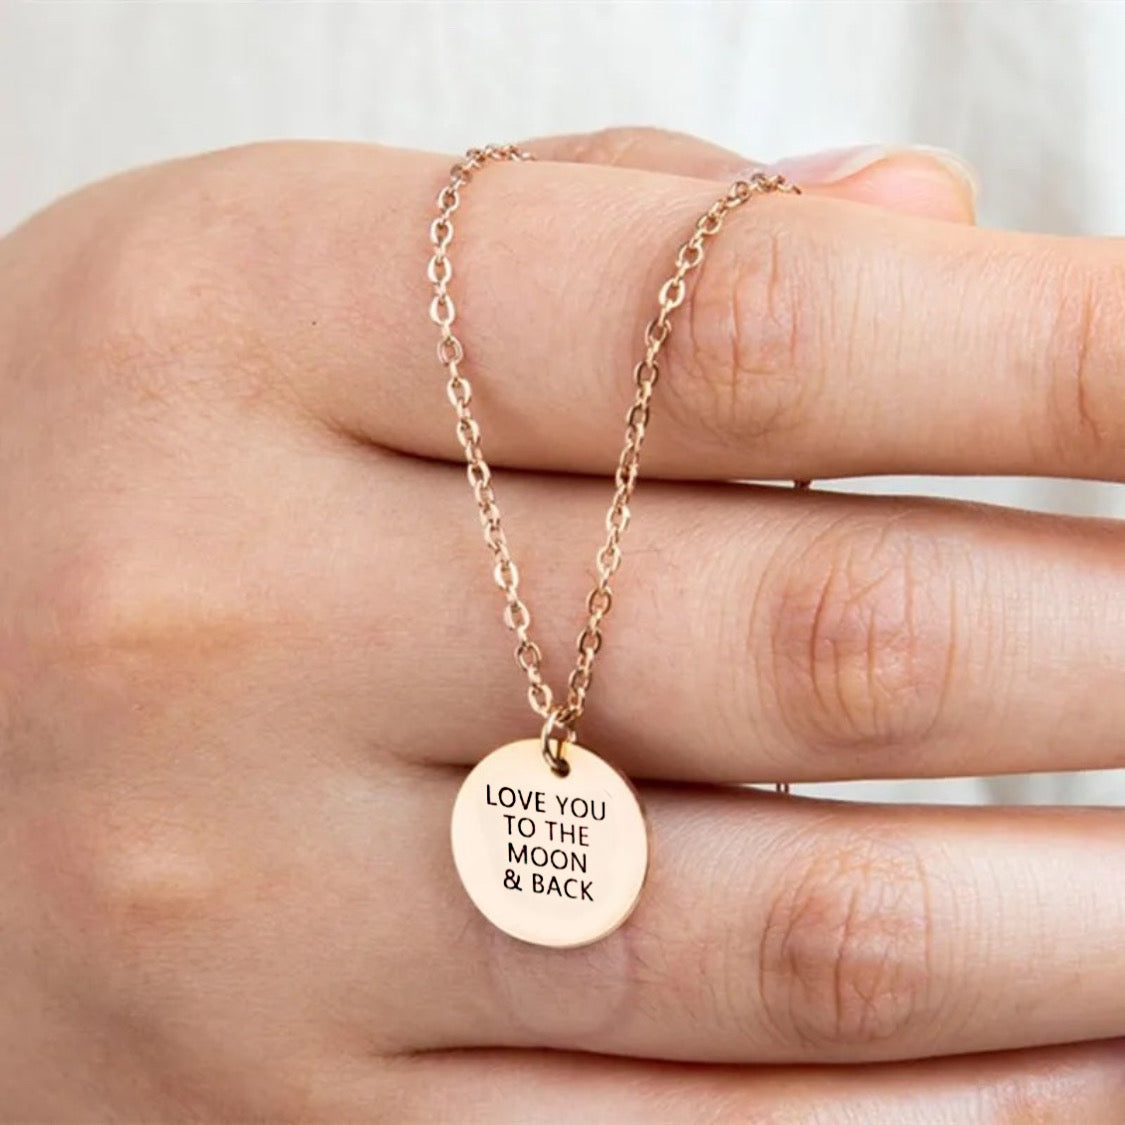 Custom engraved necklace with your words stainless steel